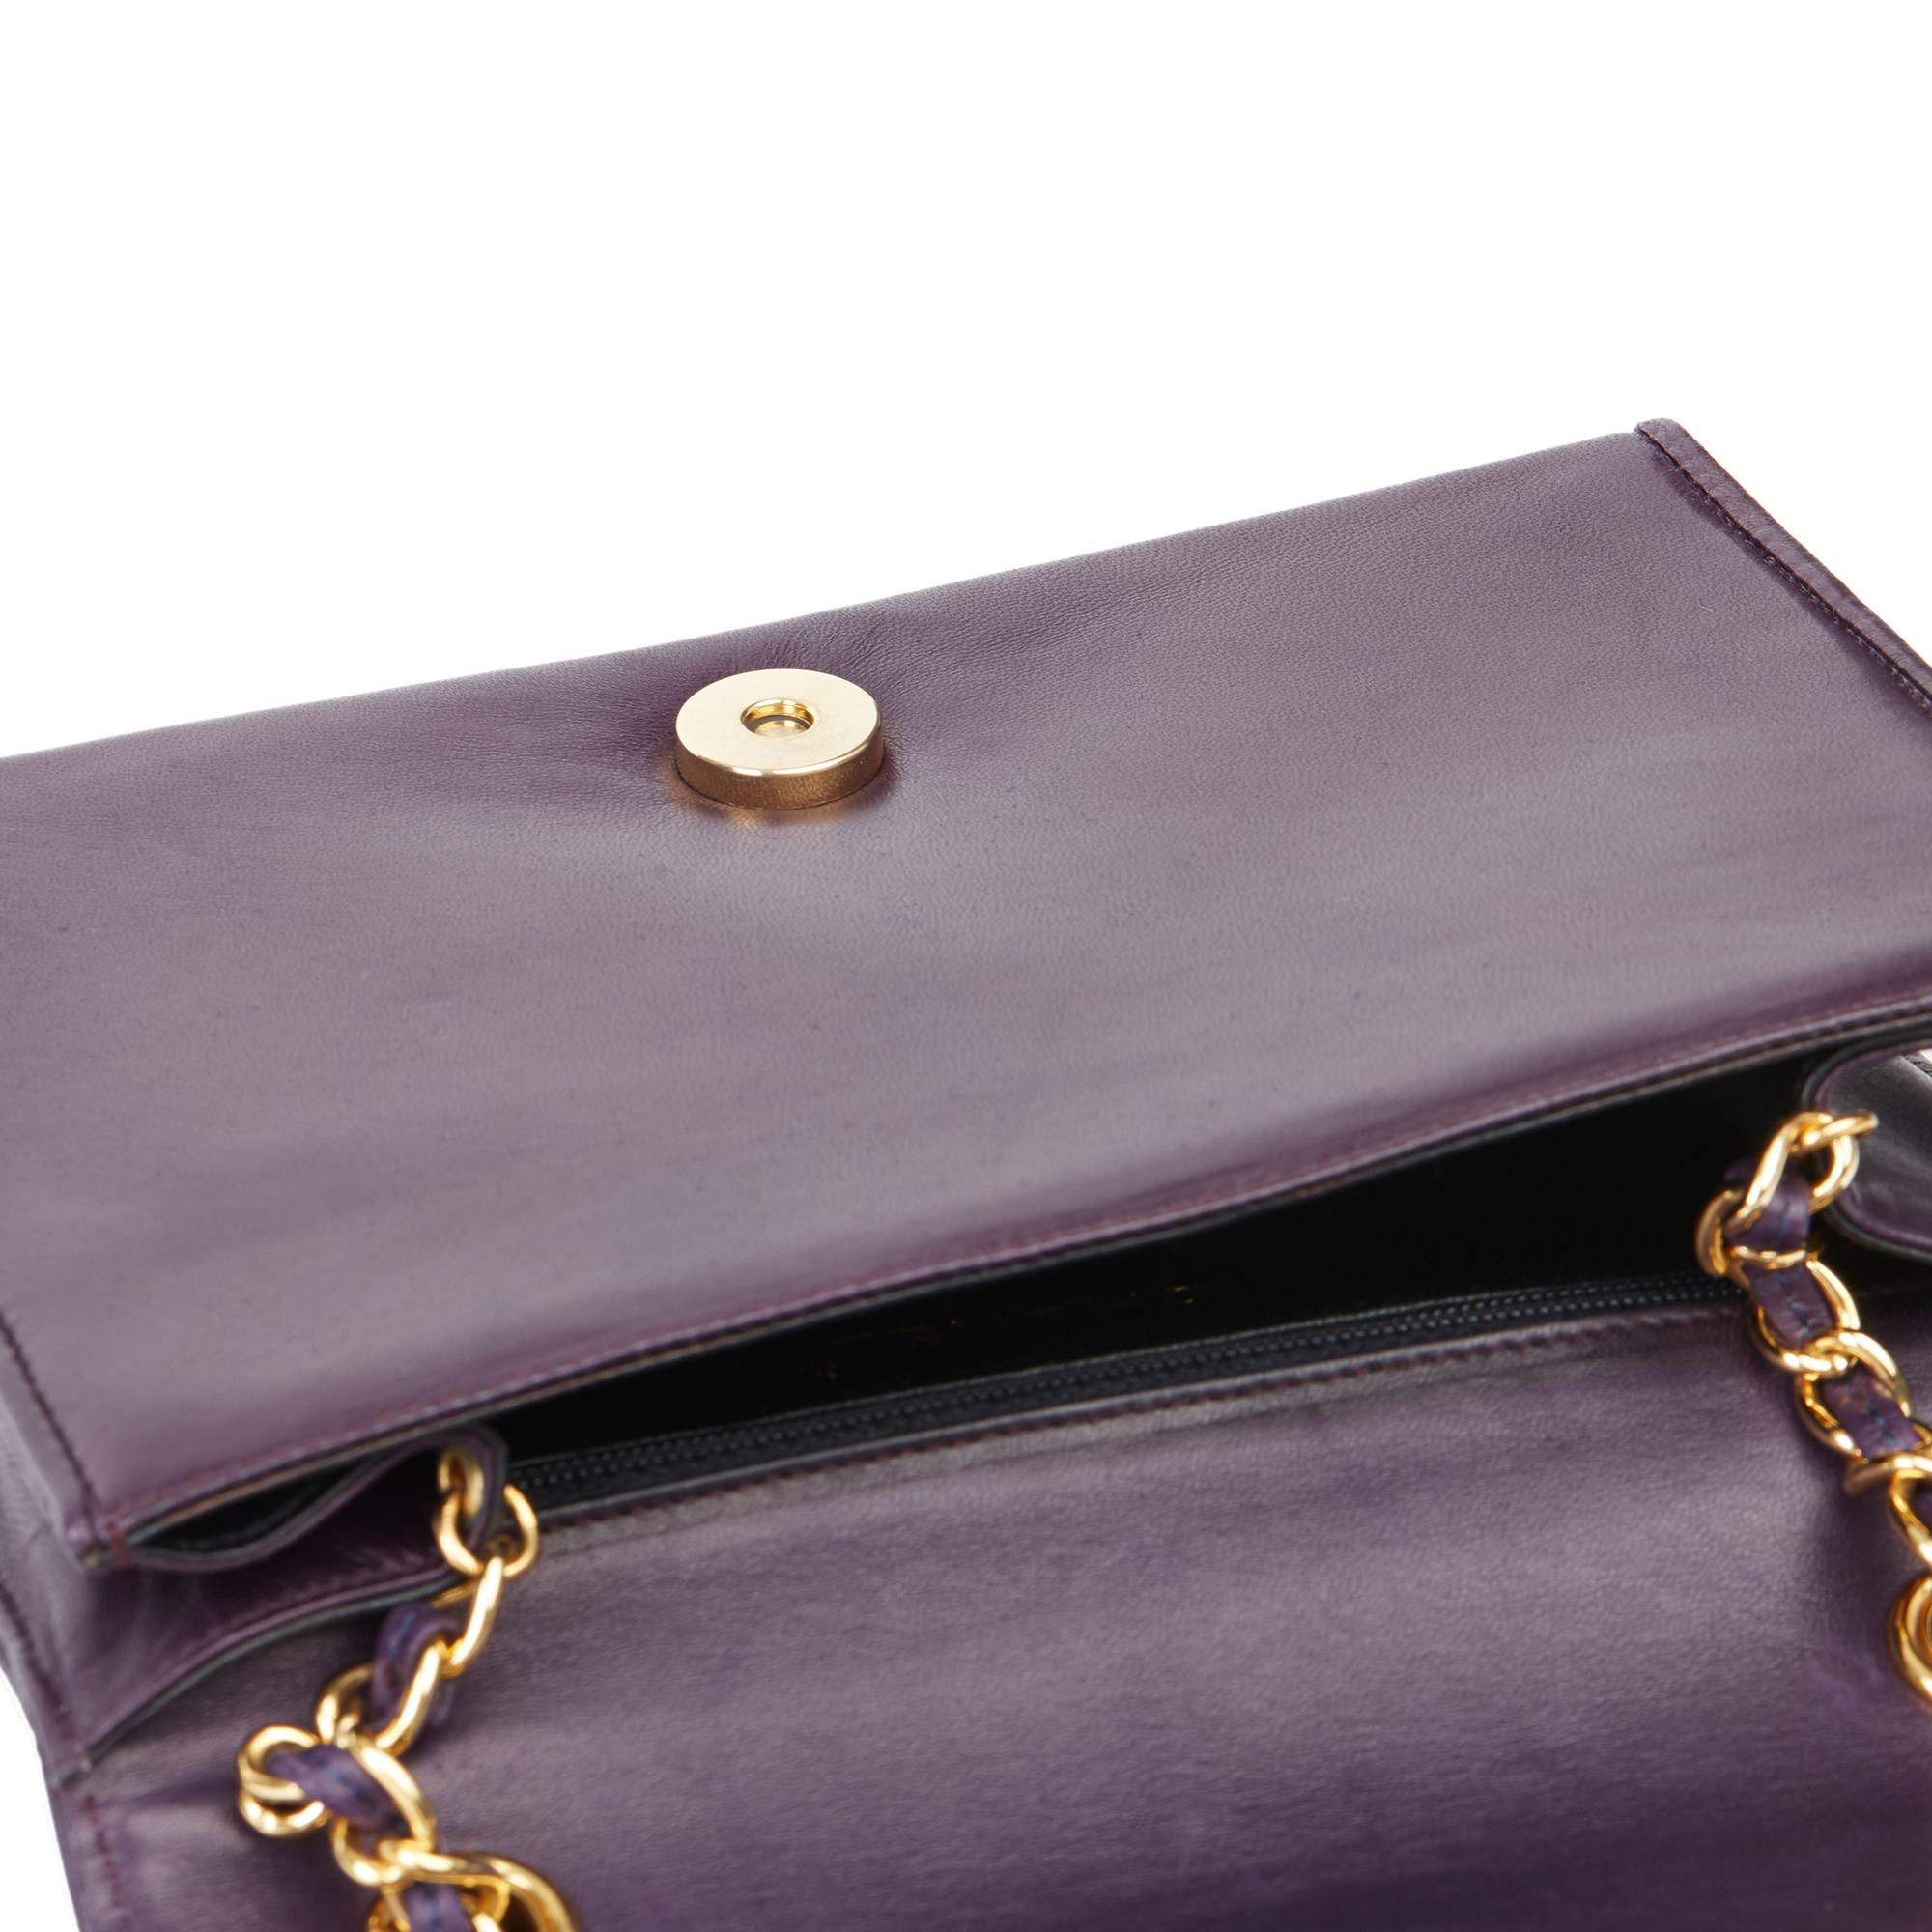 CHANEL 
Purple Lambskin Vintage Timeless Single Flap Bag

Xupes Reference: HB3504
Serial Number: 1050617
Age (Circa): 1991
Accompanied By: Authenticity Card
Authenticity Details: Authenticity Card, Serial Sticker (Made in Italy)
Gender: Ladies
Type: